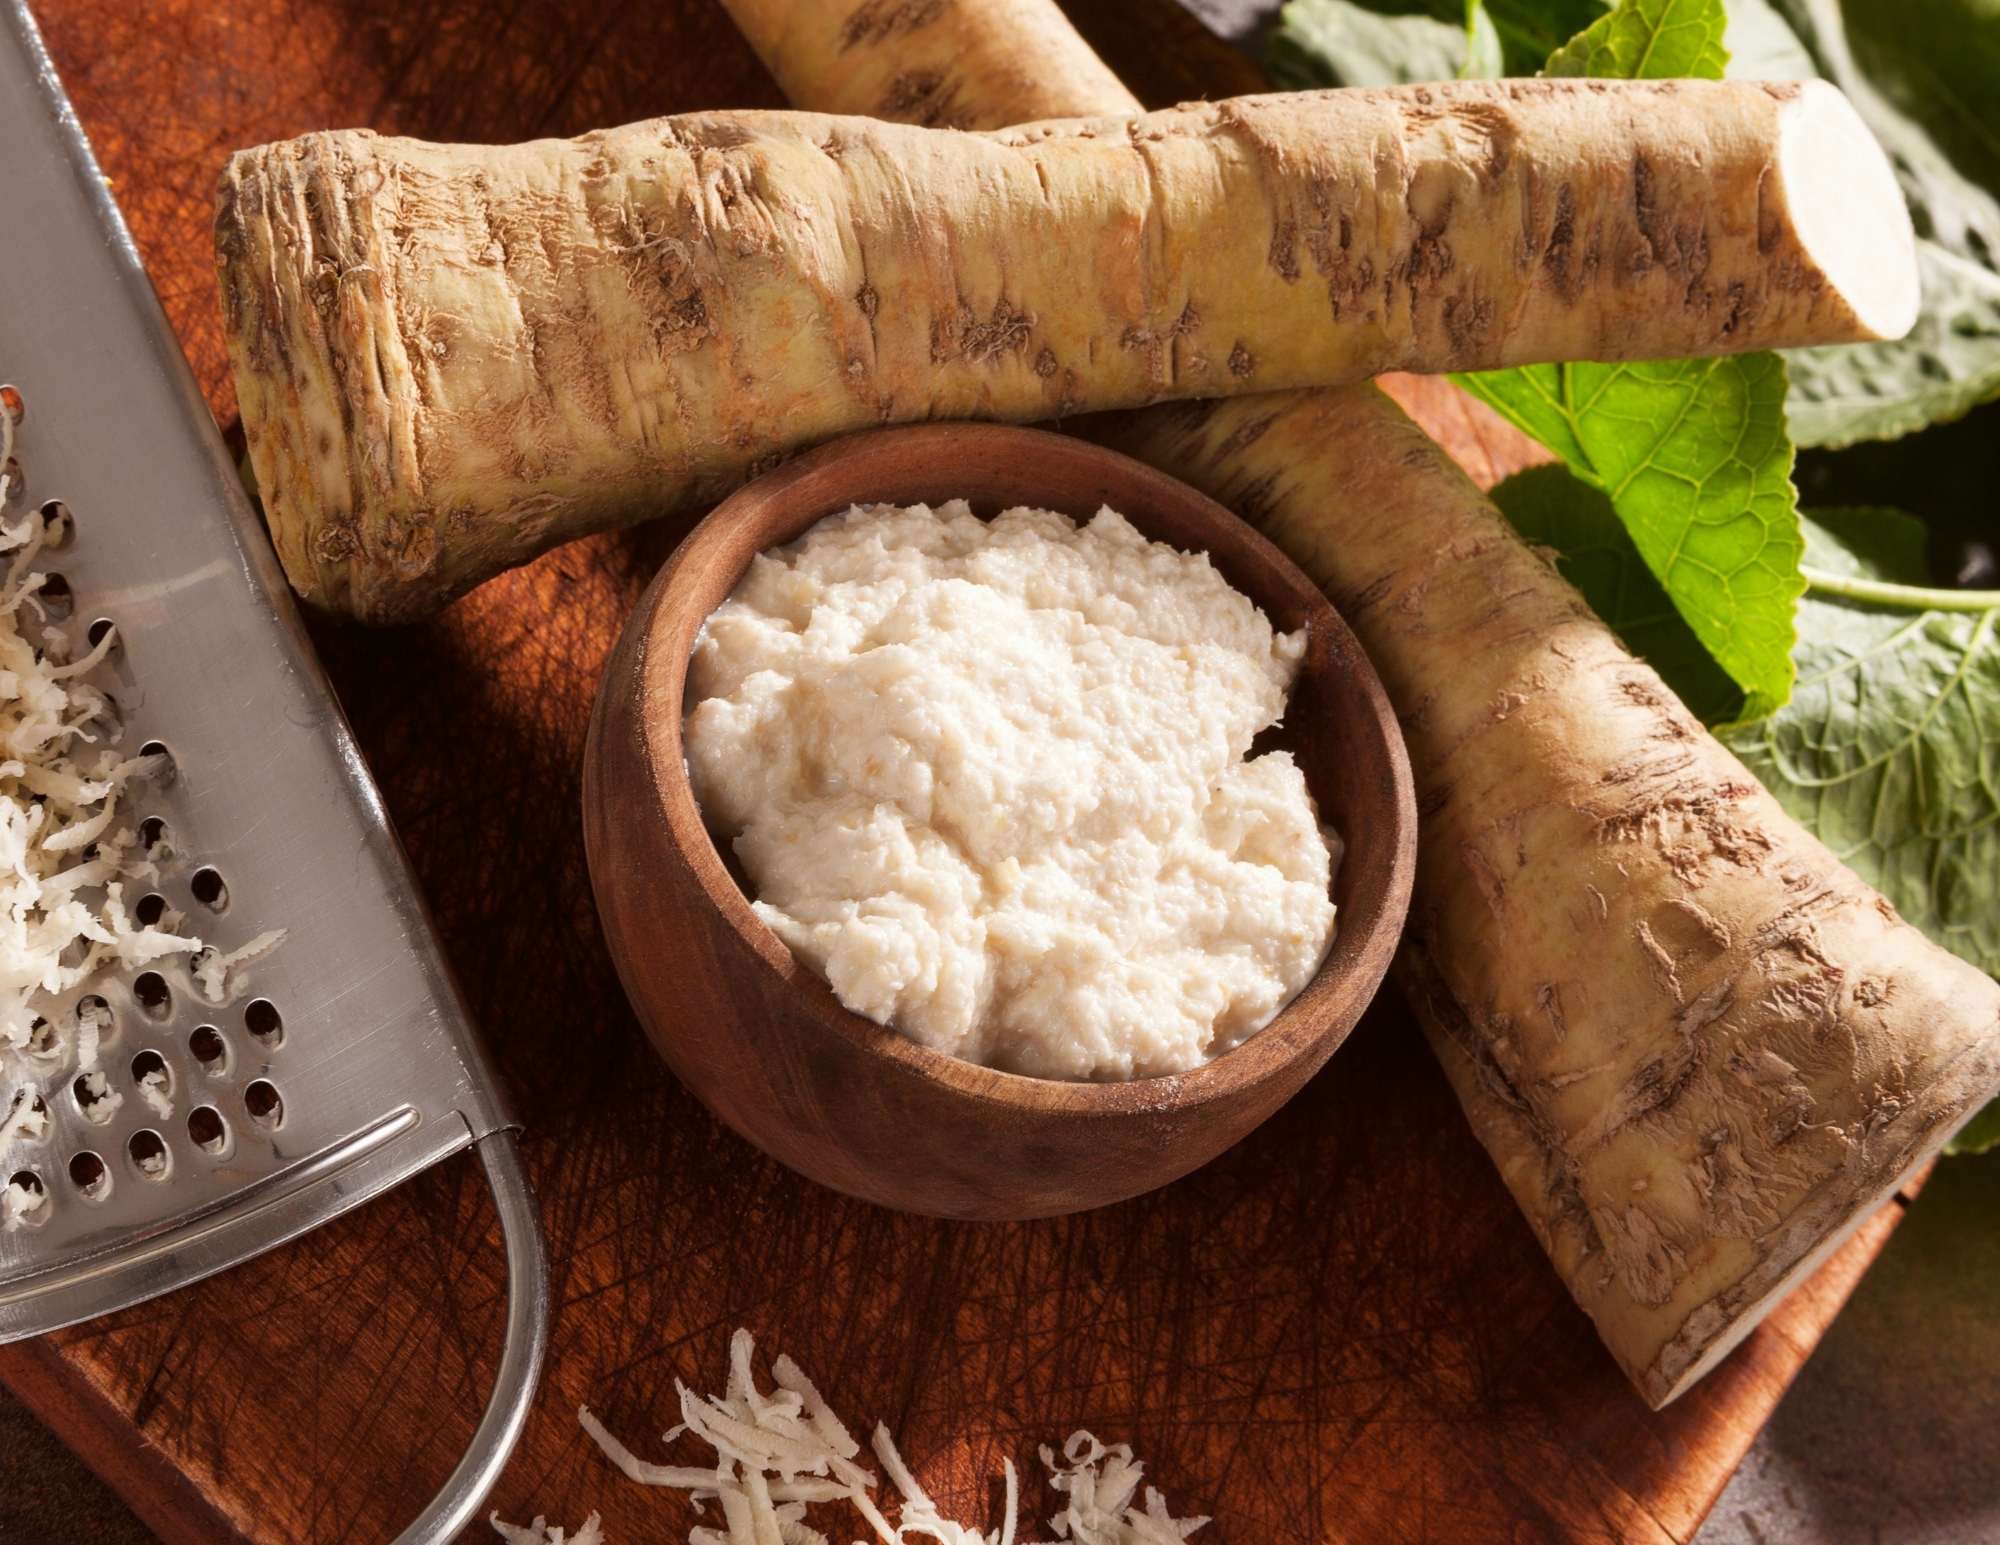 Europe hooked on Hungarian horseradish and new local gin